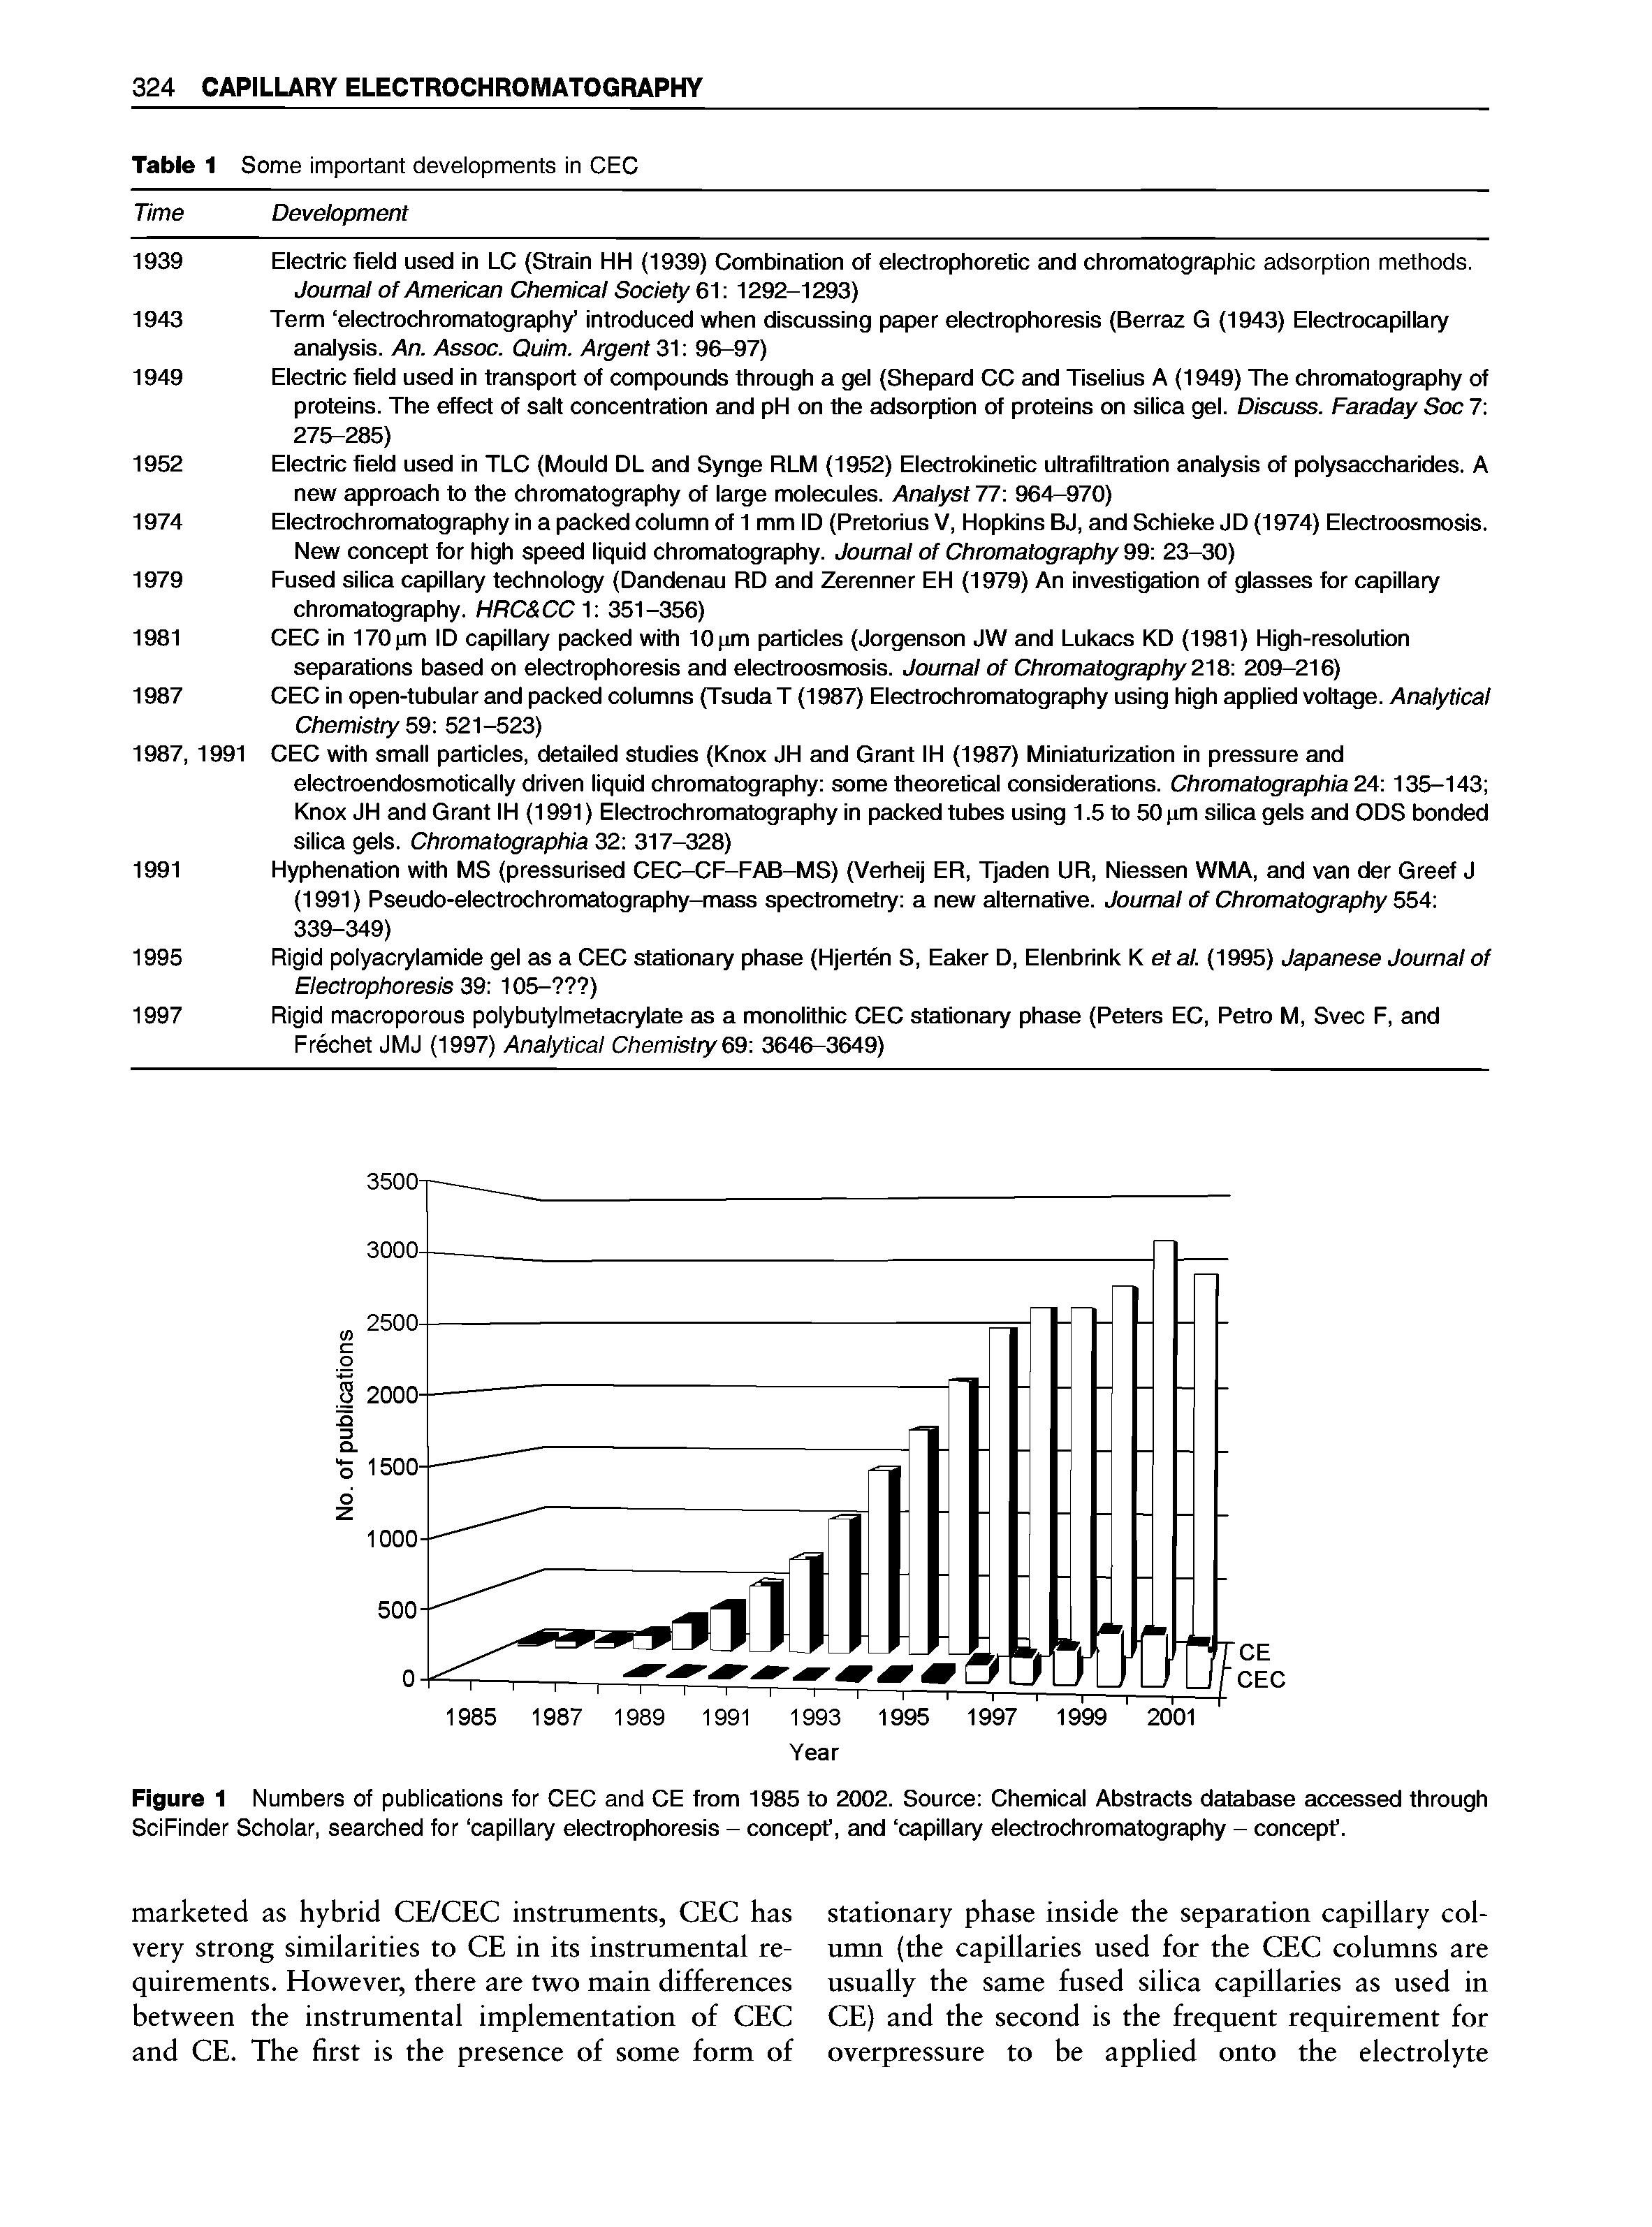 Figure 1 Numbers of pubiioations for CEC and CE from 1985 to 2002. Source Chemical Abstracts database accessed through SciFinder Sohoiar, searohed for capillary electrophoresis - concepf, and capillary electrochromatography - concepf.